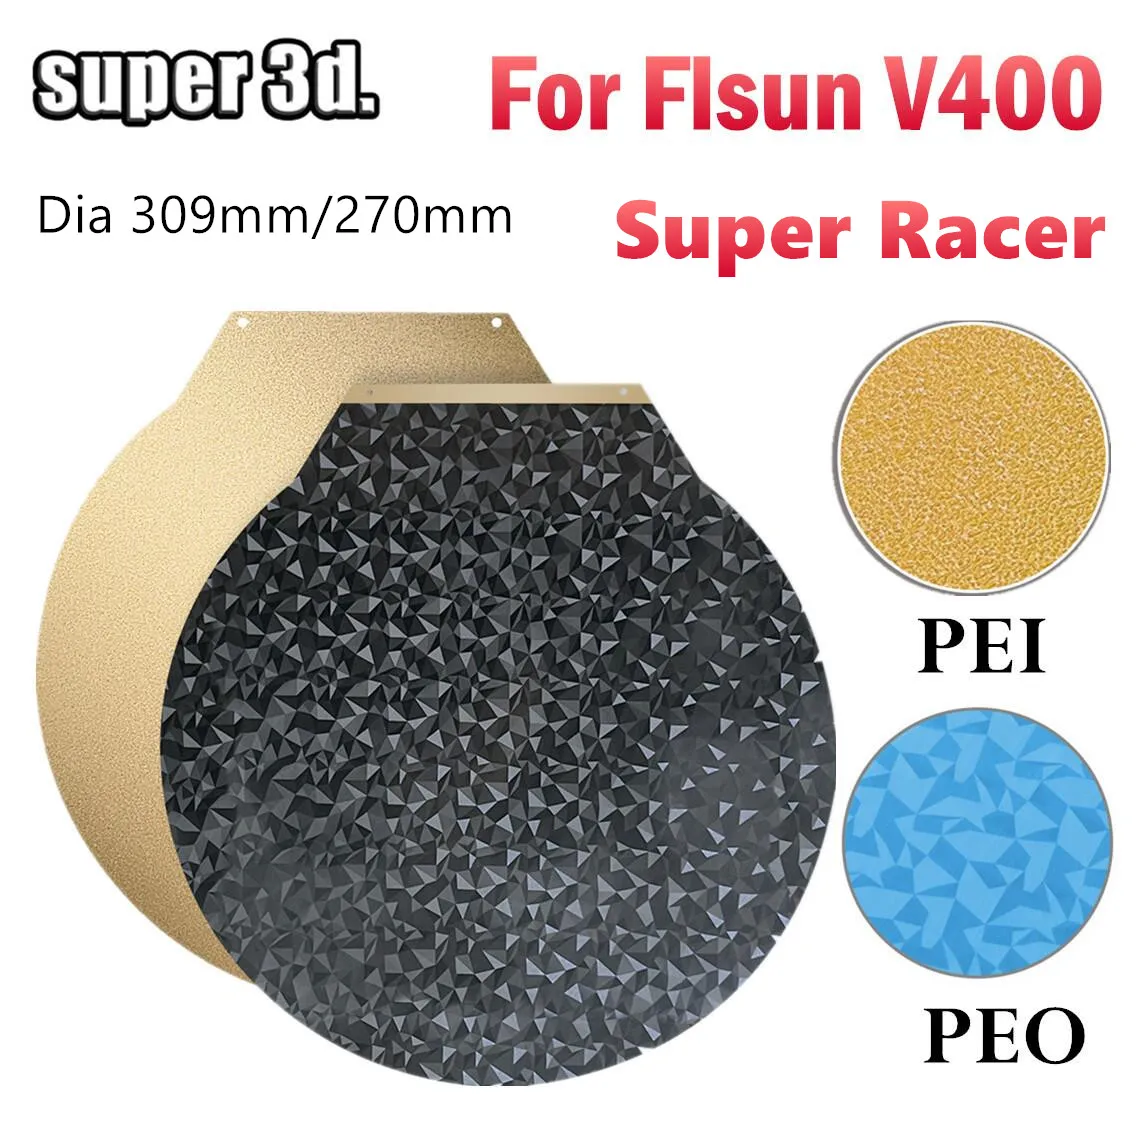 Round PEO Plate For Flsun V400 SR pei Double Sided Magnetic Steel PEO Sheet 3D Printer Build Plate For V400 Flsun Super Racer energetic pei peo sheet round dia 270mm double sided textured pei smooth pet carbon fiber build plate for flsun super racer